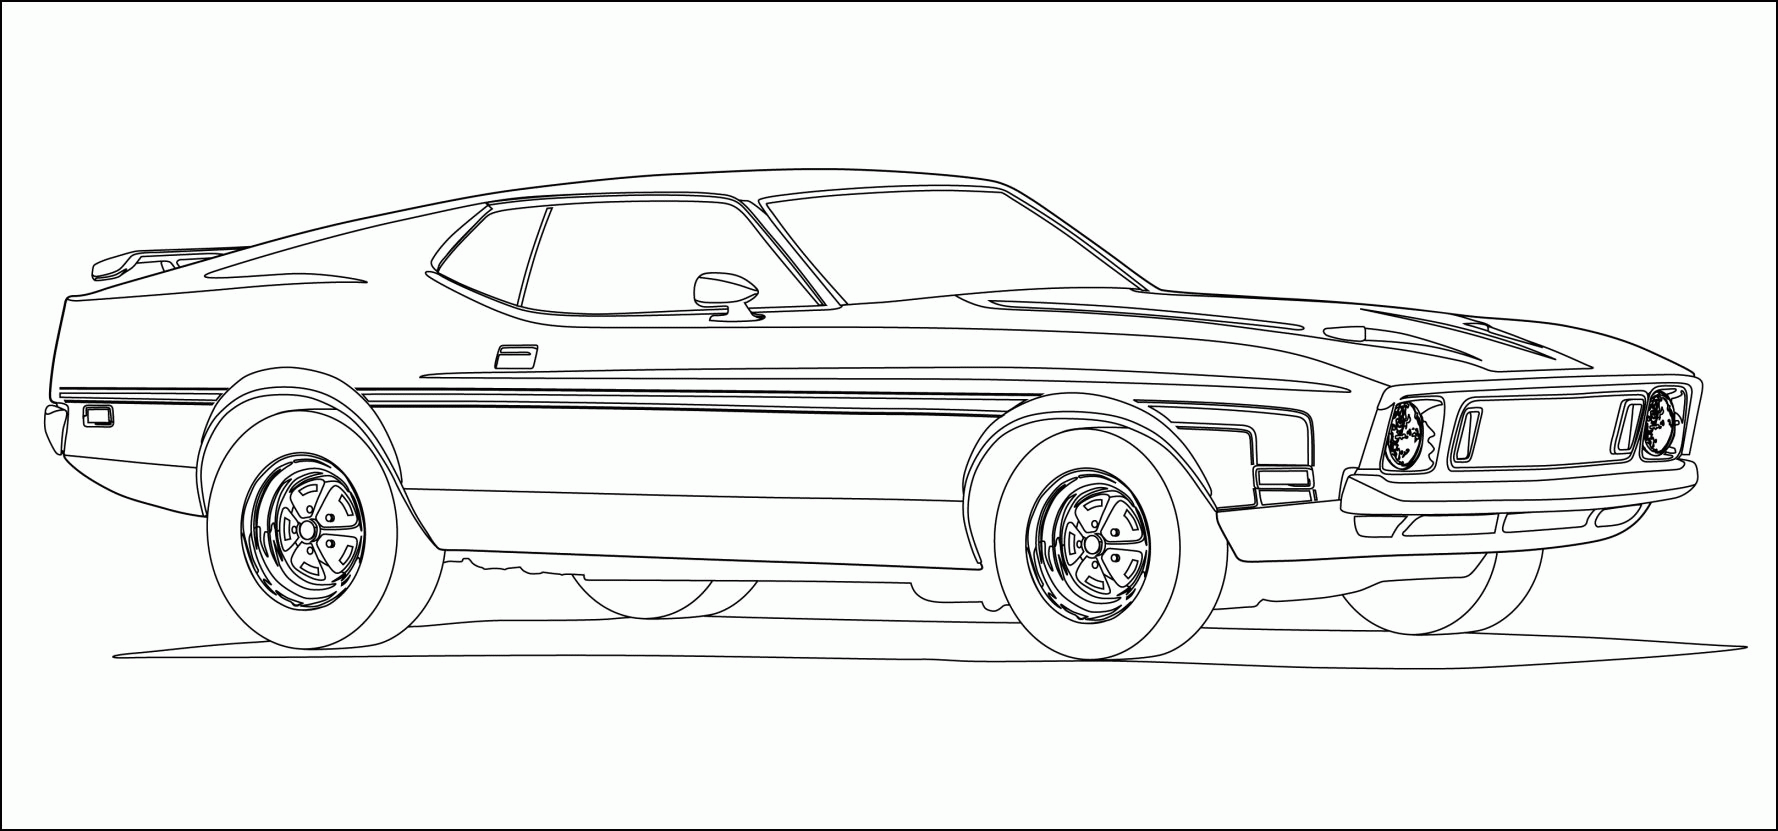 7 Pics of Muscle Car Coloring Pages Printable - Awesome Car ...